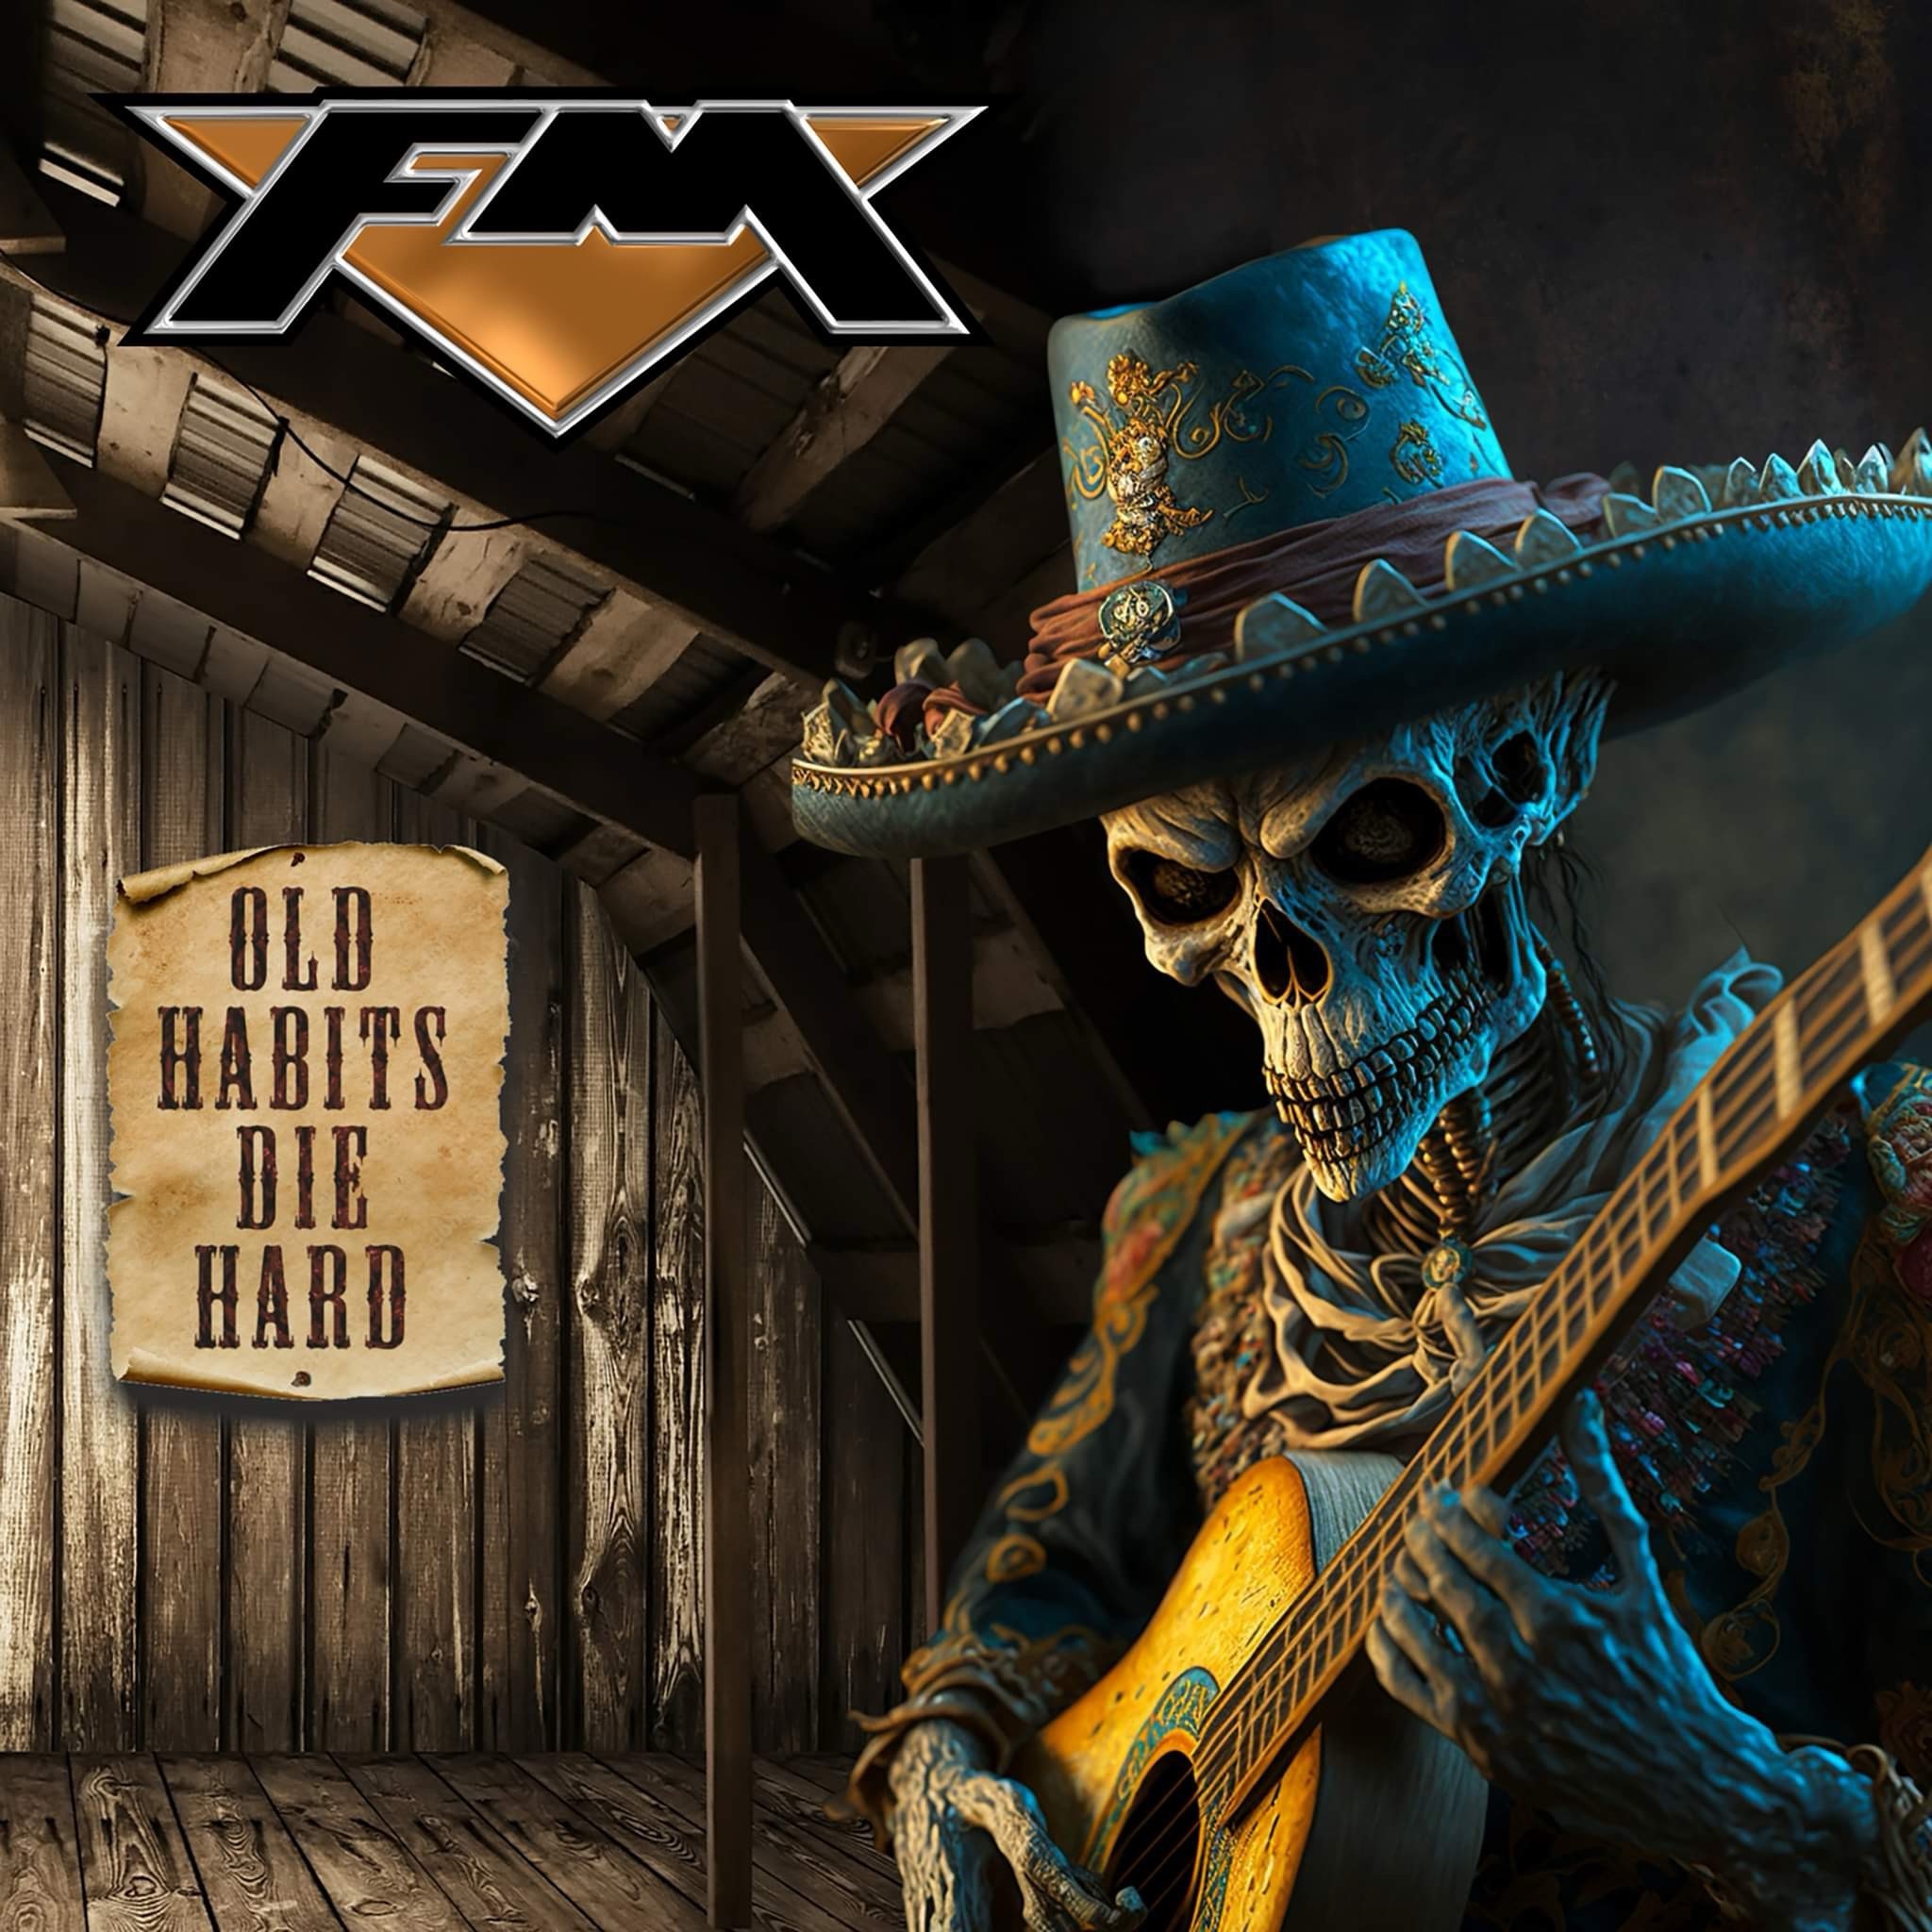 FM Share “Whatever It Takes” Video Clip